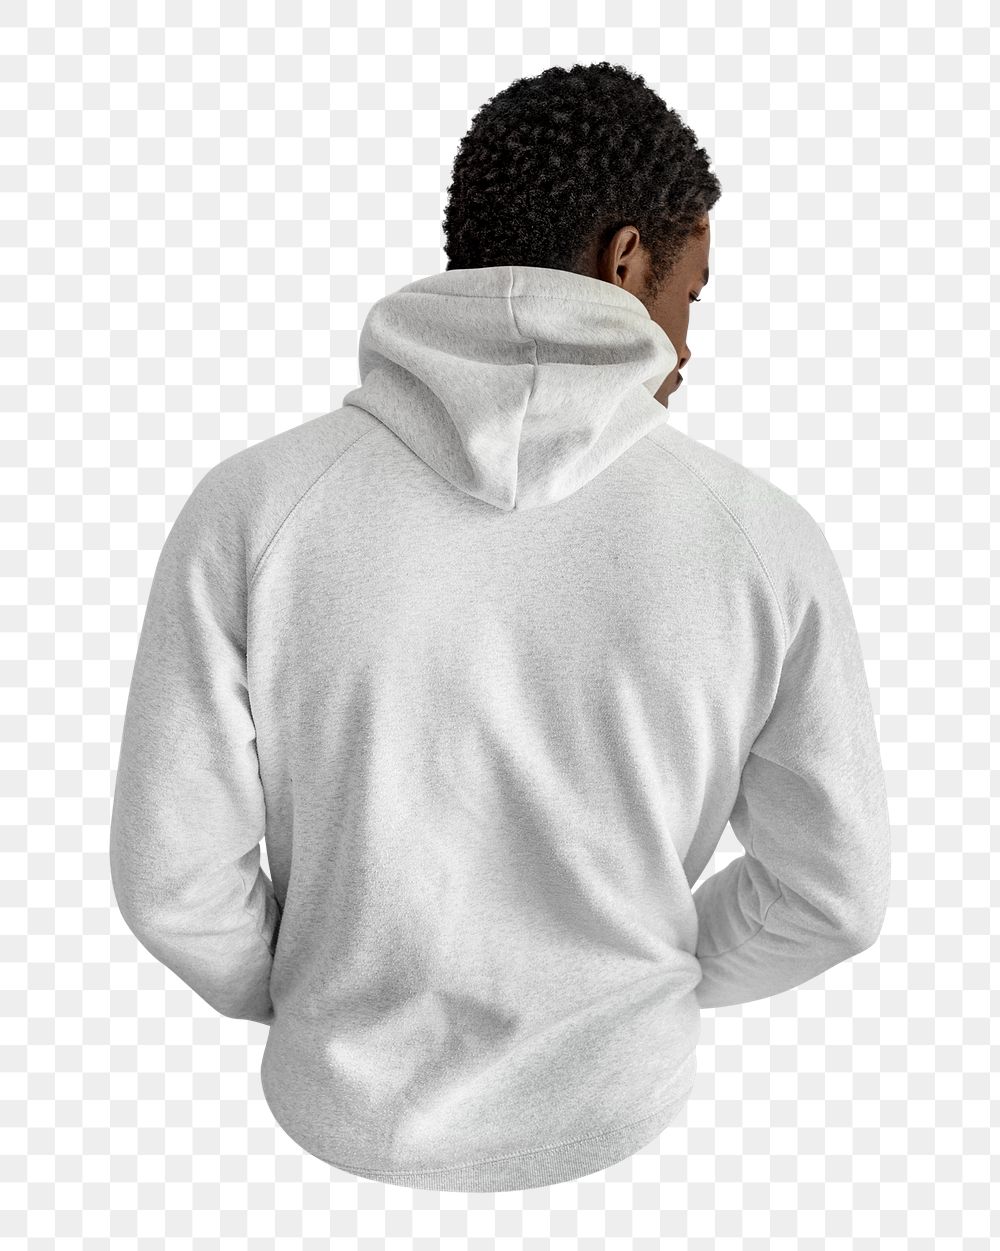 Png back, man in hoodie on transparent background